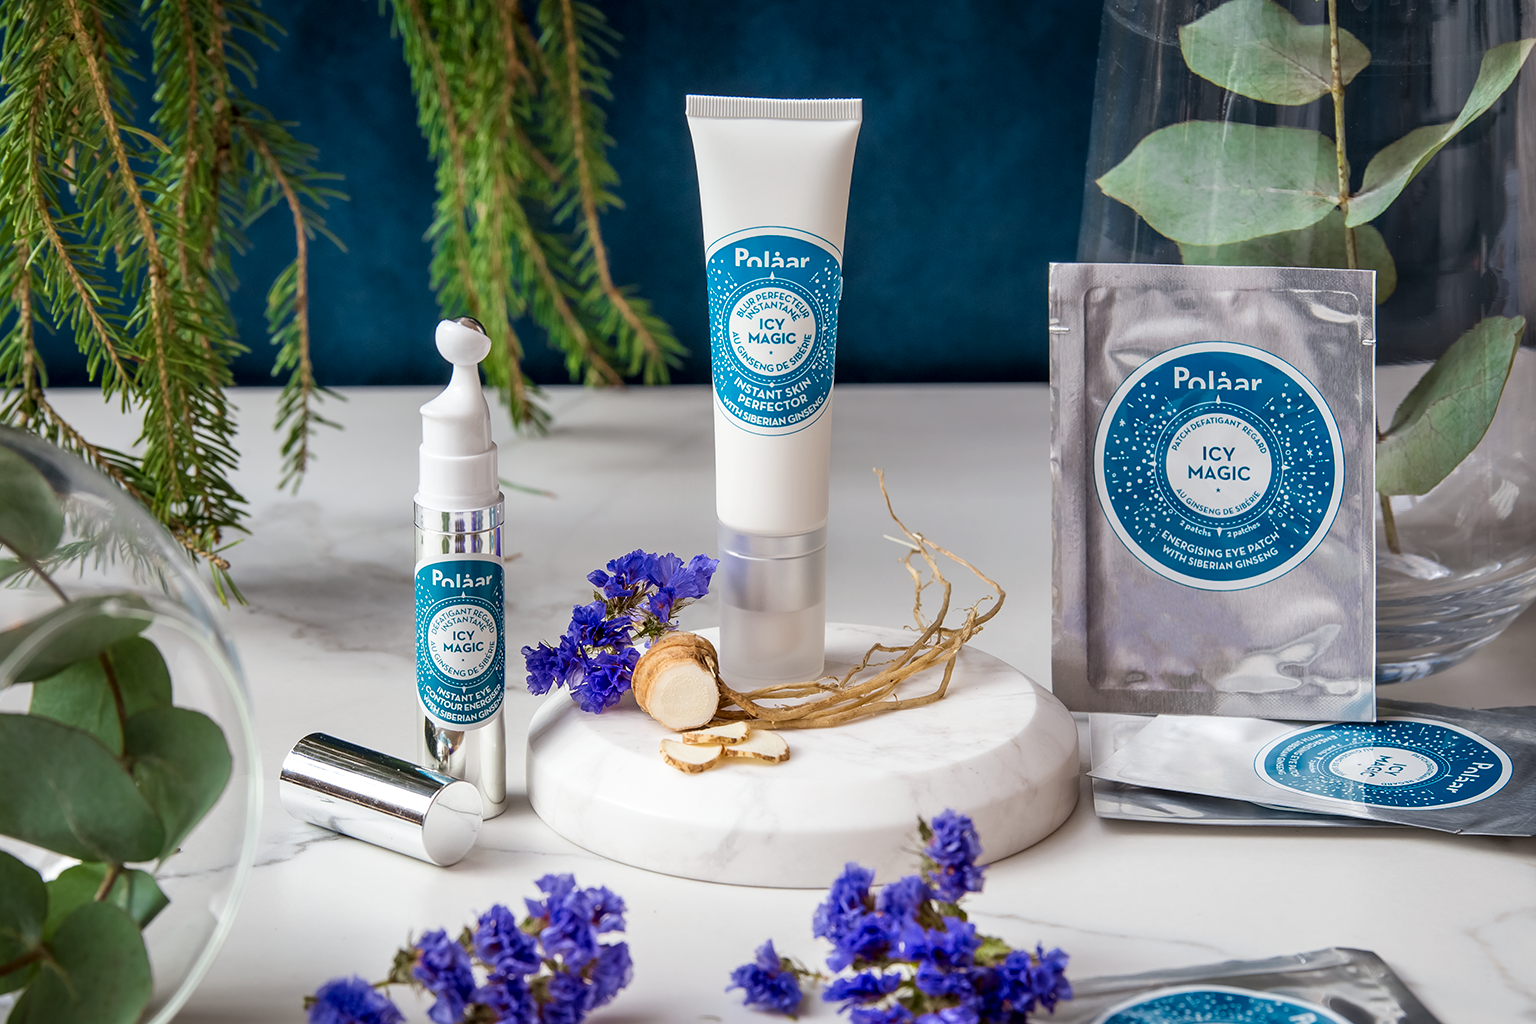 'POLAAR', FRANCE'S NATURAL SKIN CARE BRAND, IS NOW IN TURKEY